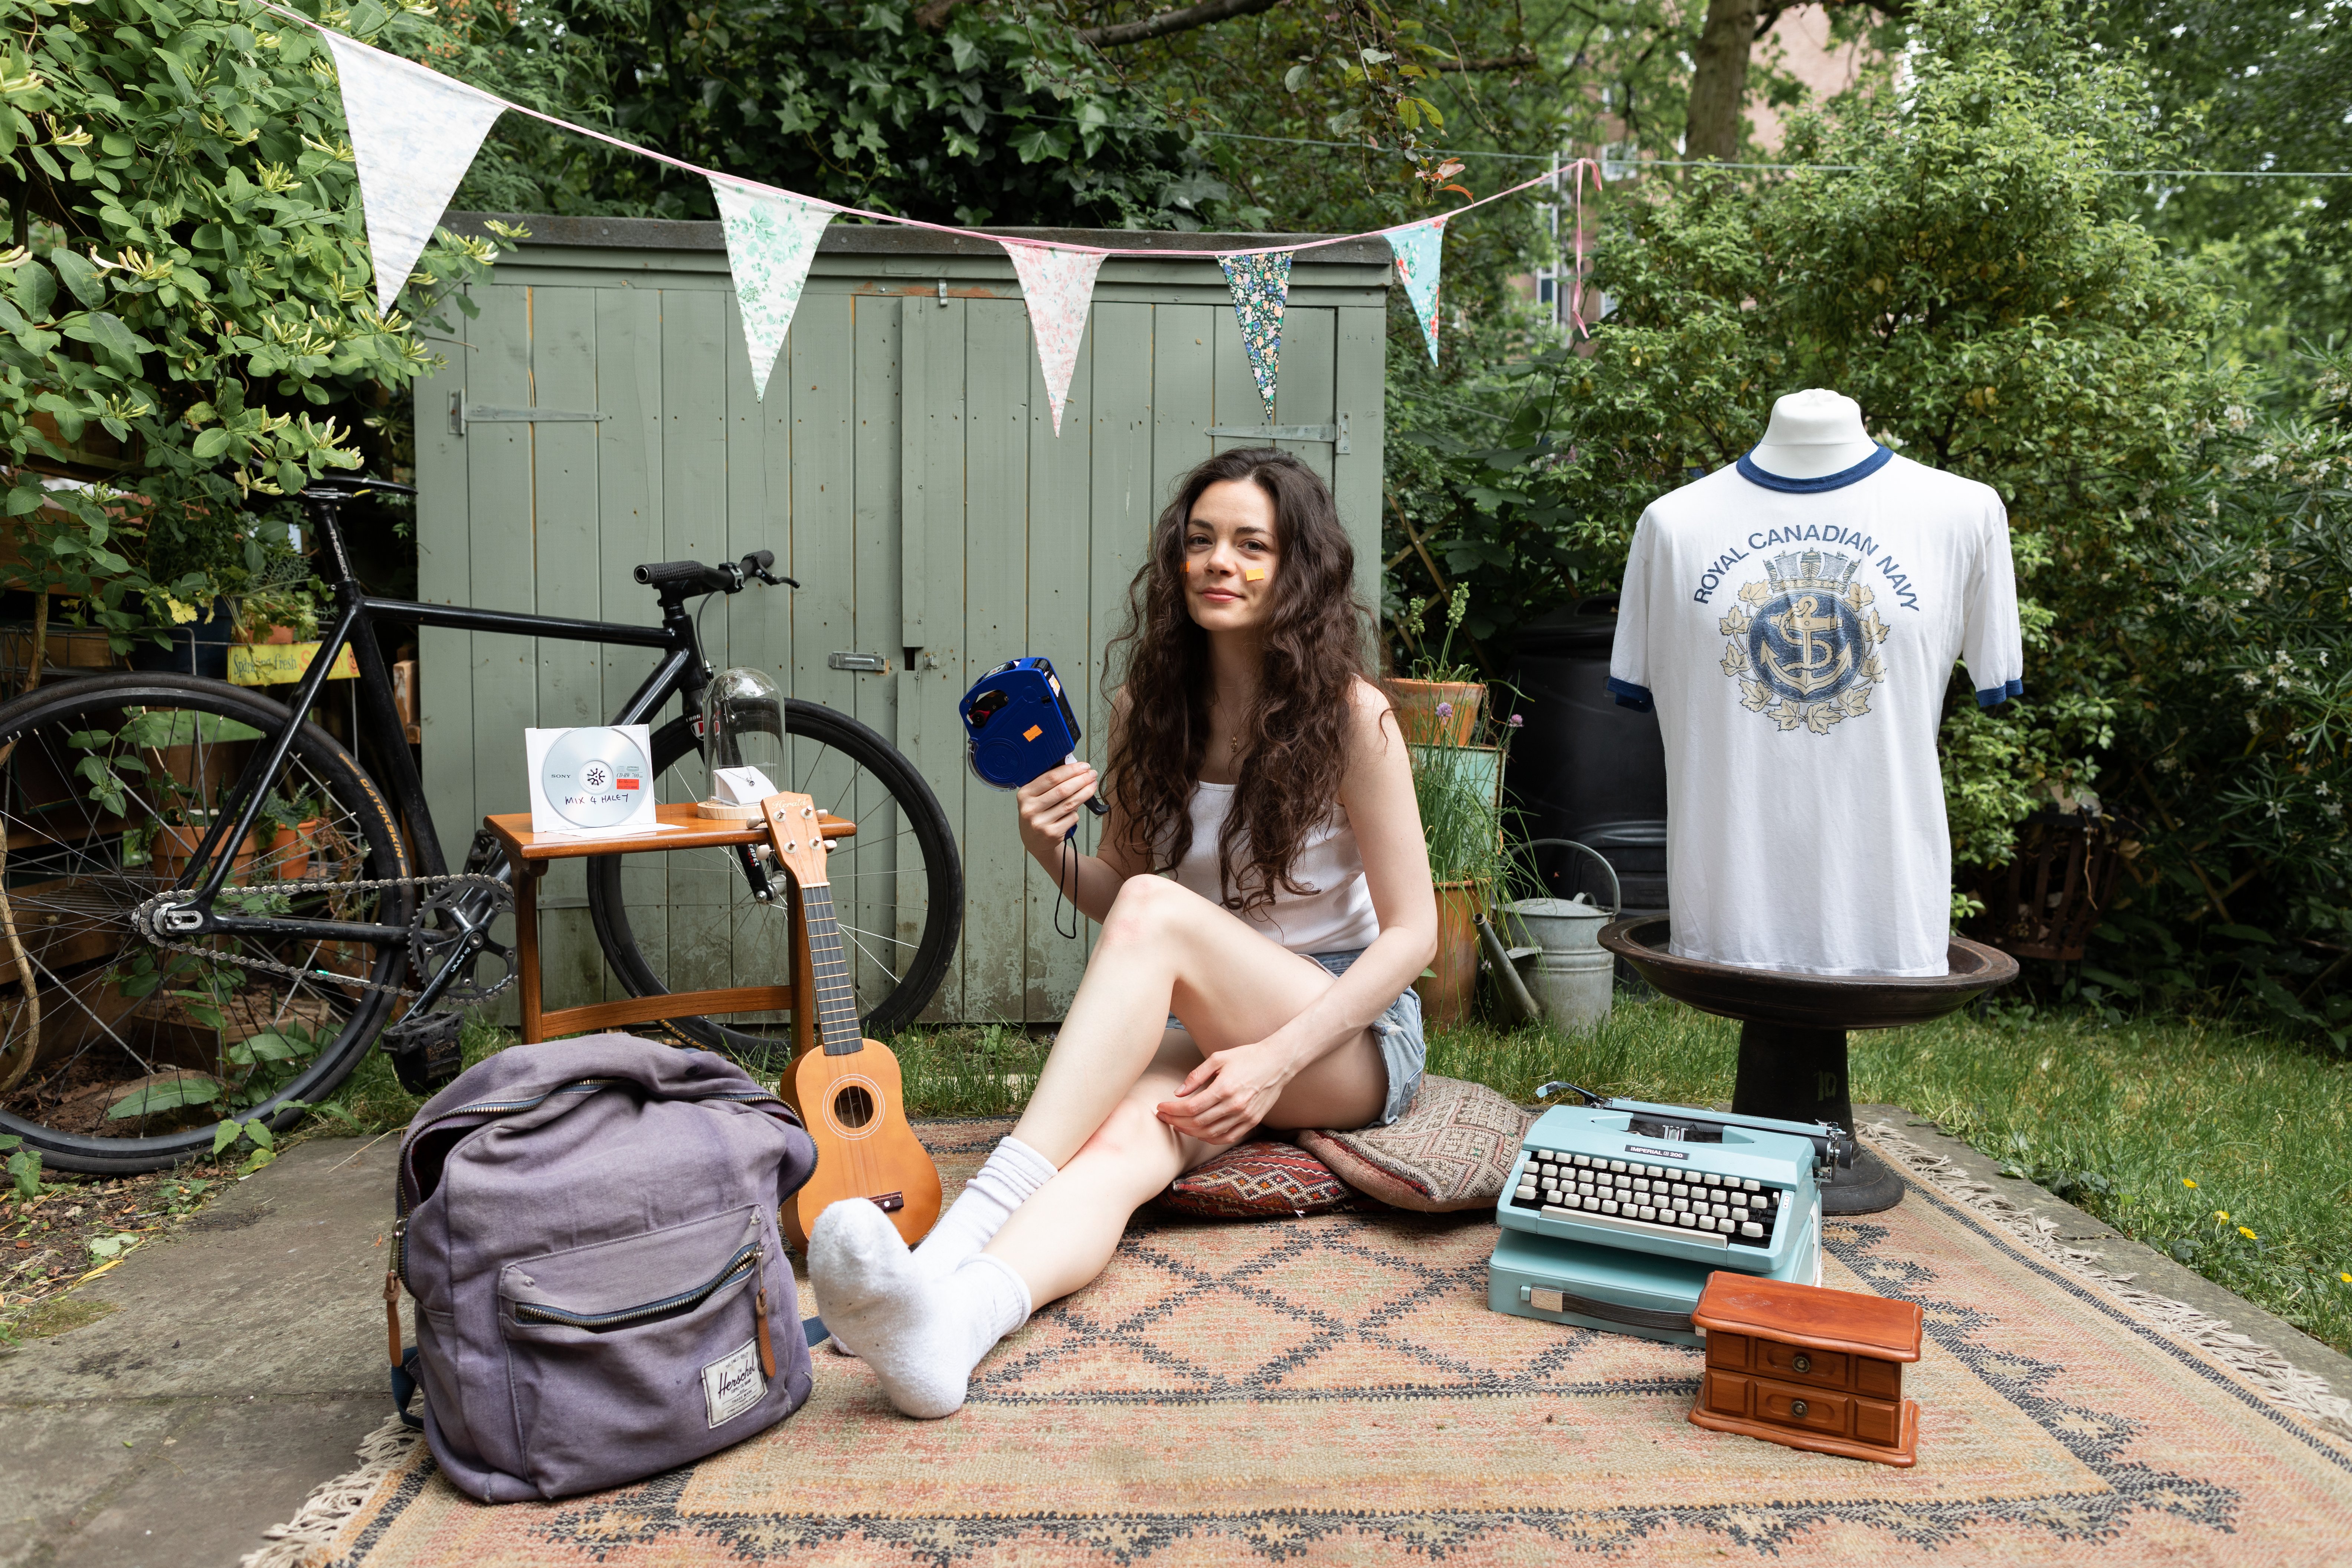 Haley sits in a yard among items from her ex-boyfriends